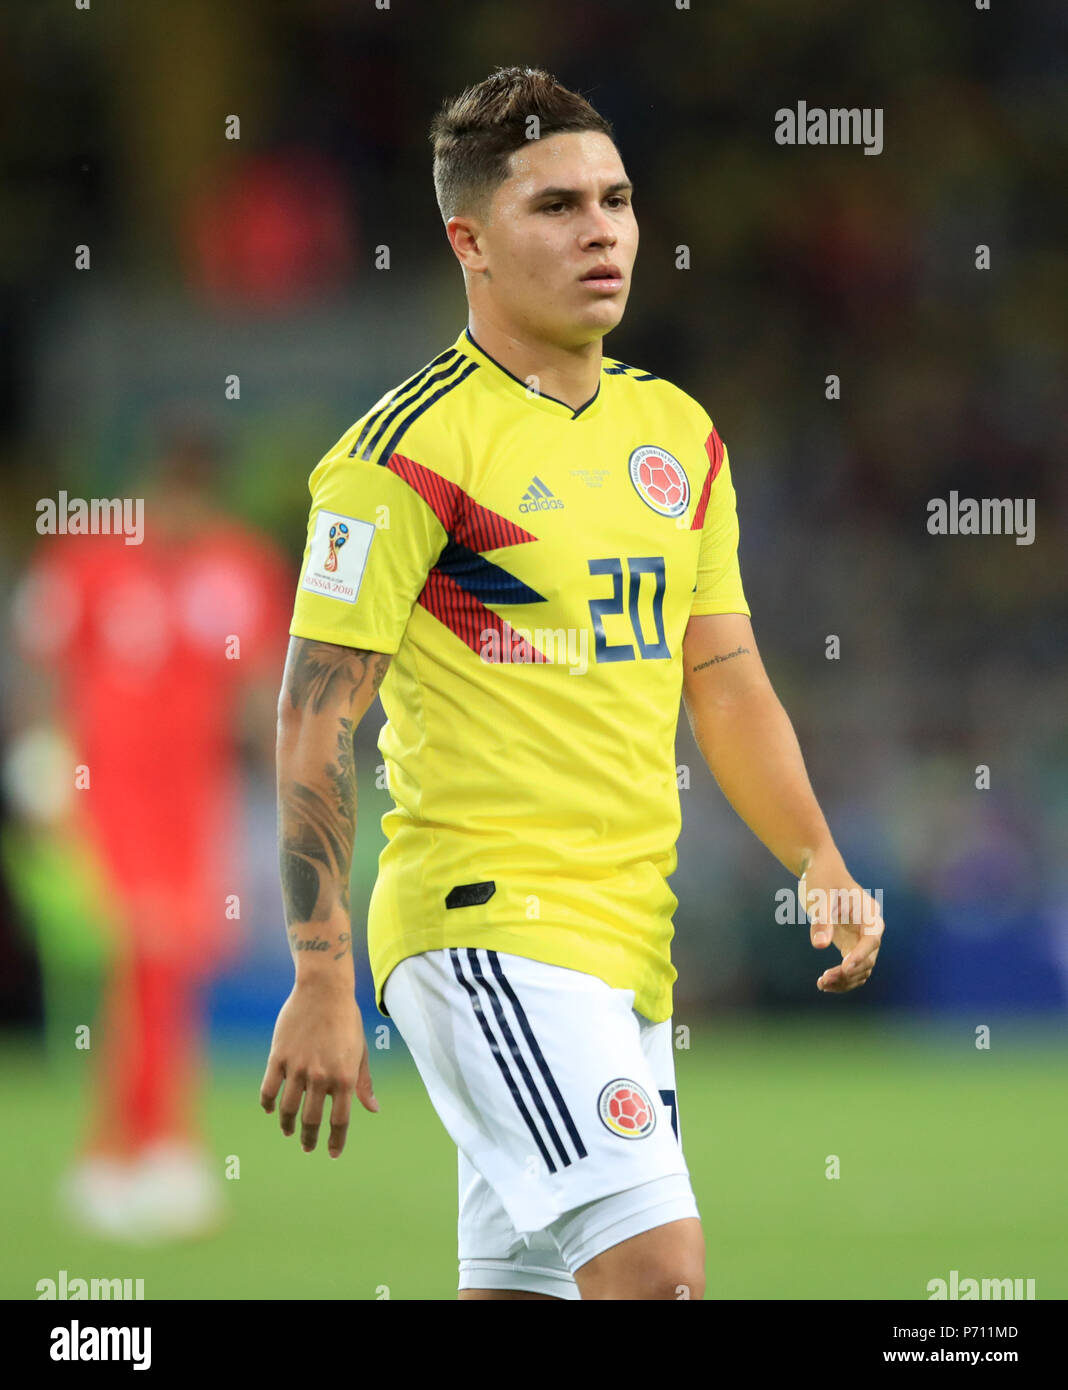 Colombia's Juan Fernando Quintero during the FIFA World Cup 2018, round of 16 match at the Spartak Stadium, Moscow. PRESS ASSOCIATION Photo. Picture date: Tuesday July 3, 2018. See PA story WORLDCUP England. Photo credit should read: Adam Davy/PA Wire. RESTRICTIONS: Editorial use only. No commercial use. No use with any unofficial 3rd party logos. No manipulation of images. No video emulation Stock Photo